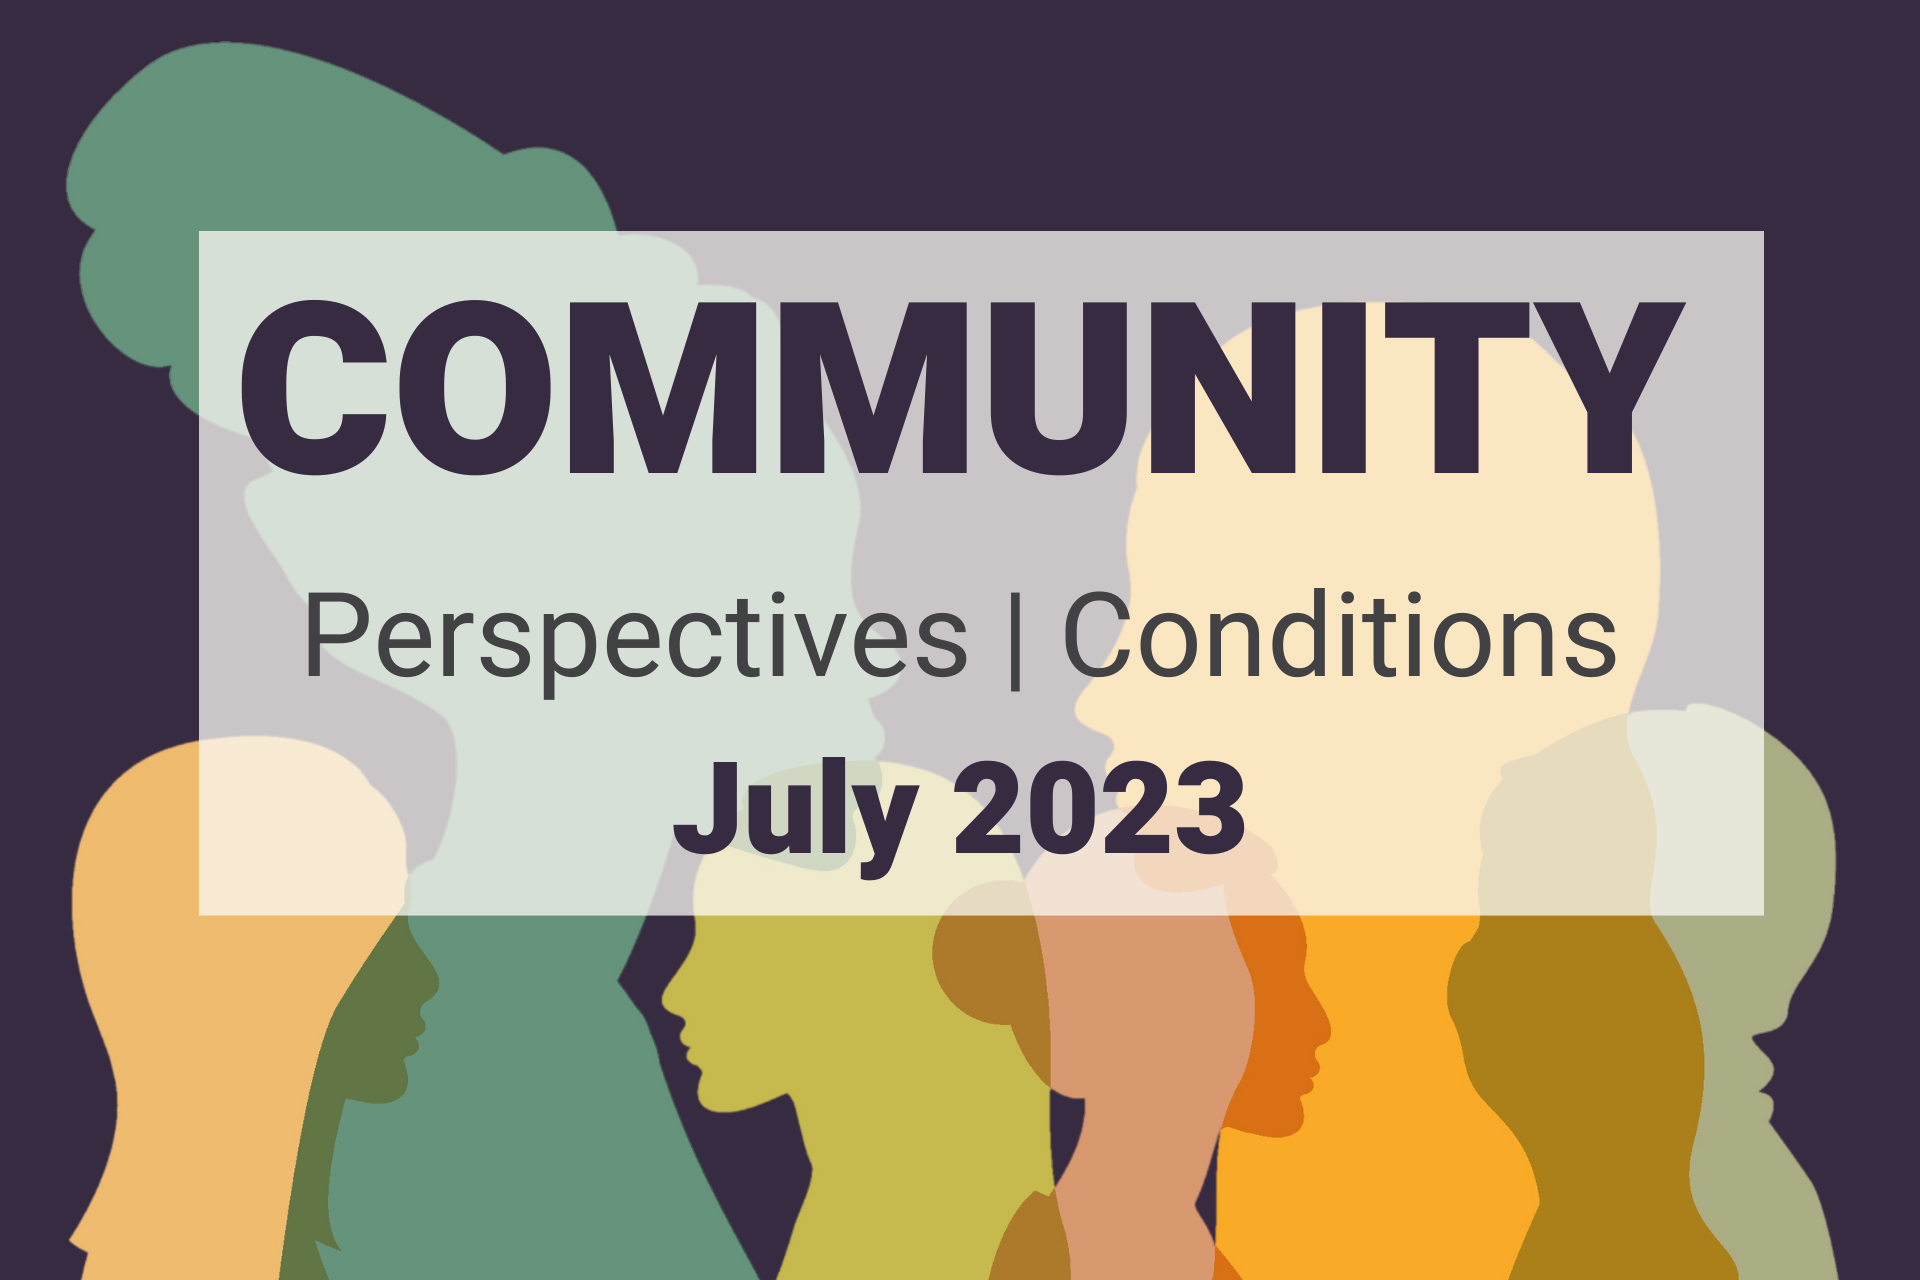 Community perspectives and conditions from the Fed's Beige Book, July 2023